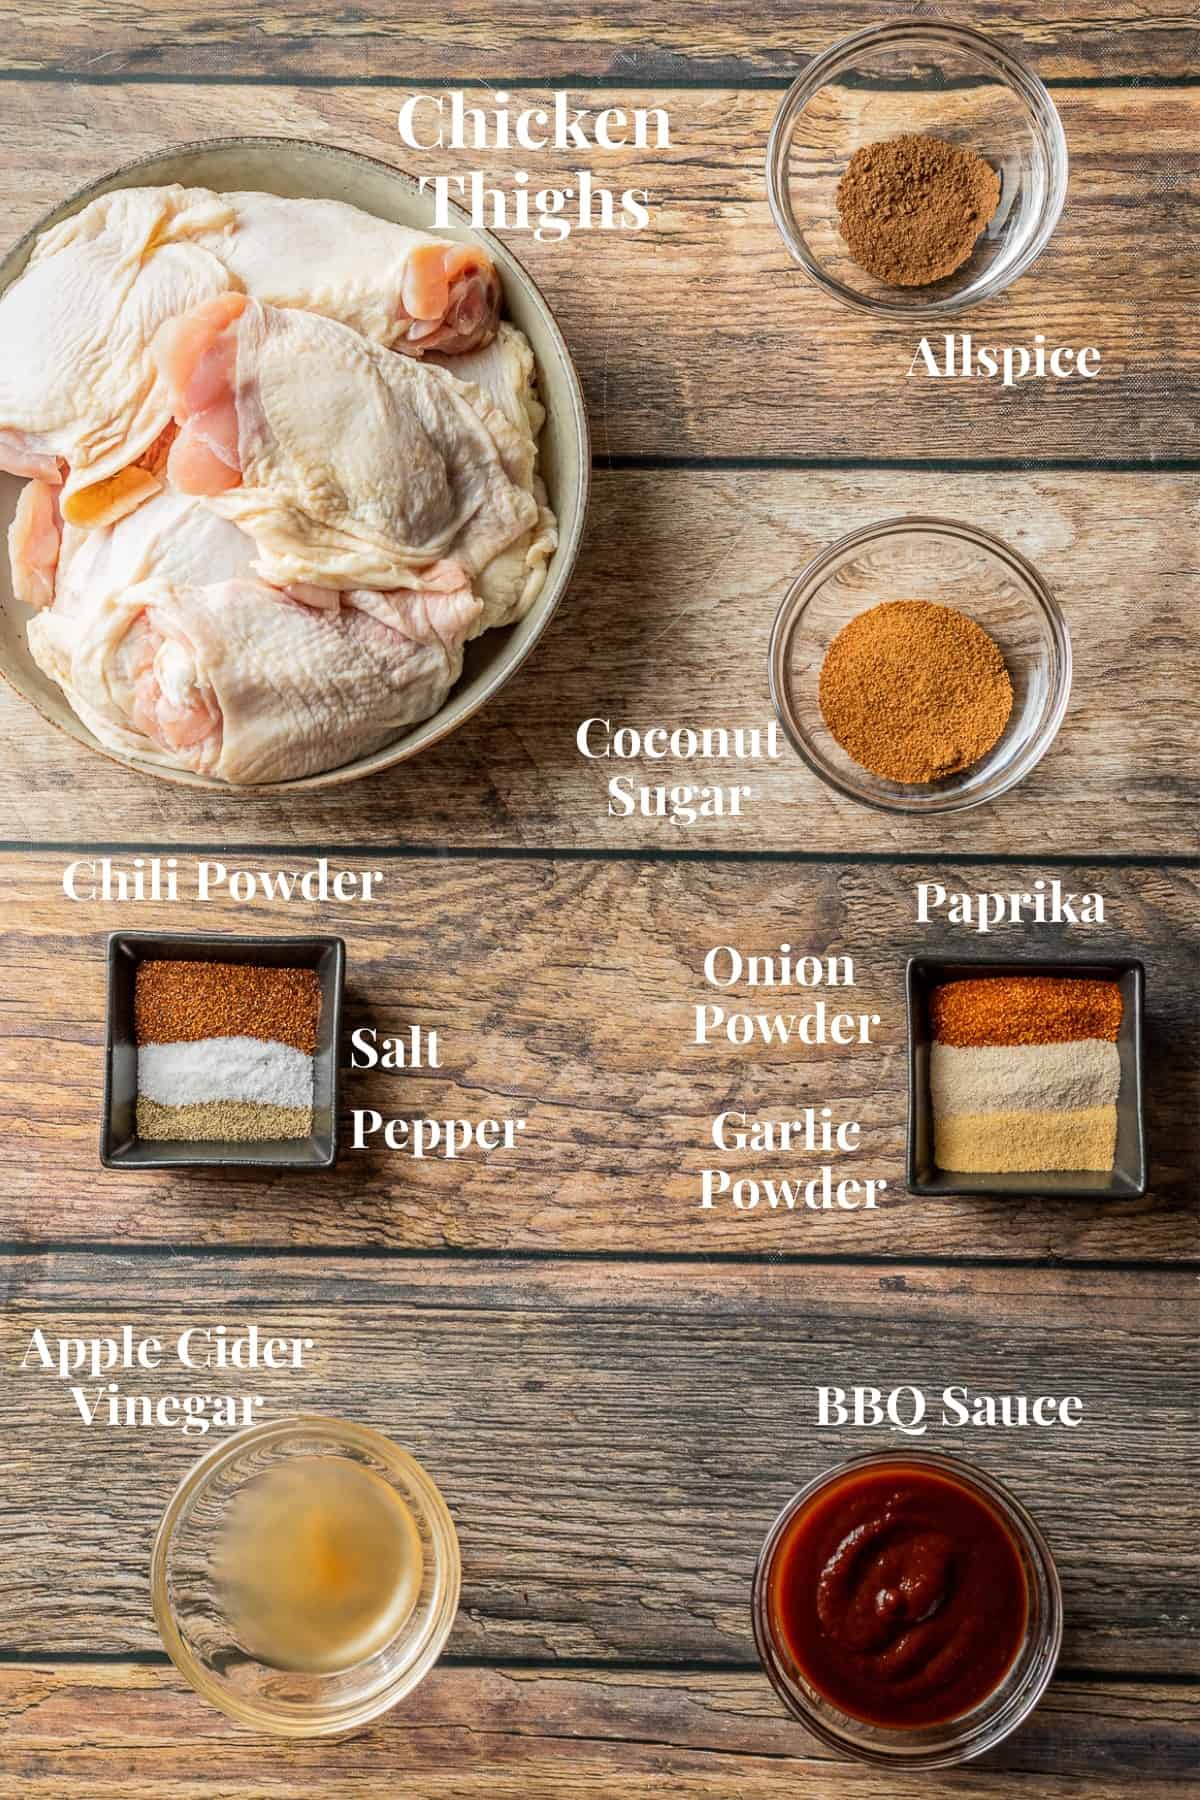 An overview shot of the ingredients needed for smoked chicken on a wood background.